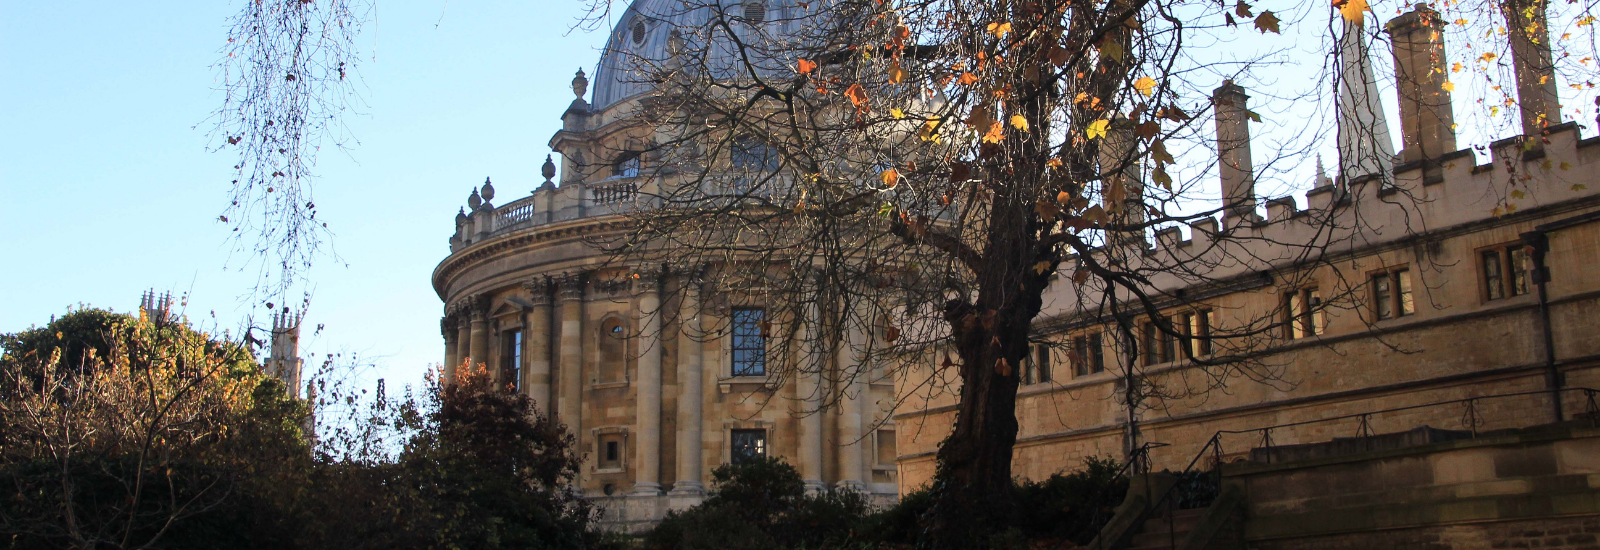 The Radcliffe Camera viewed from Exeter College gardens